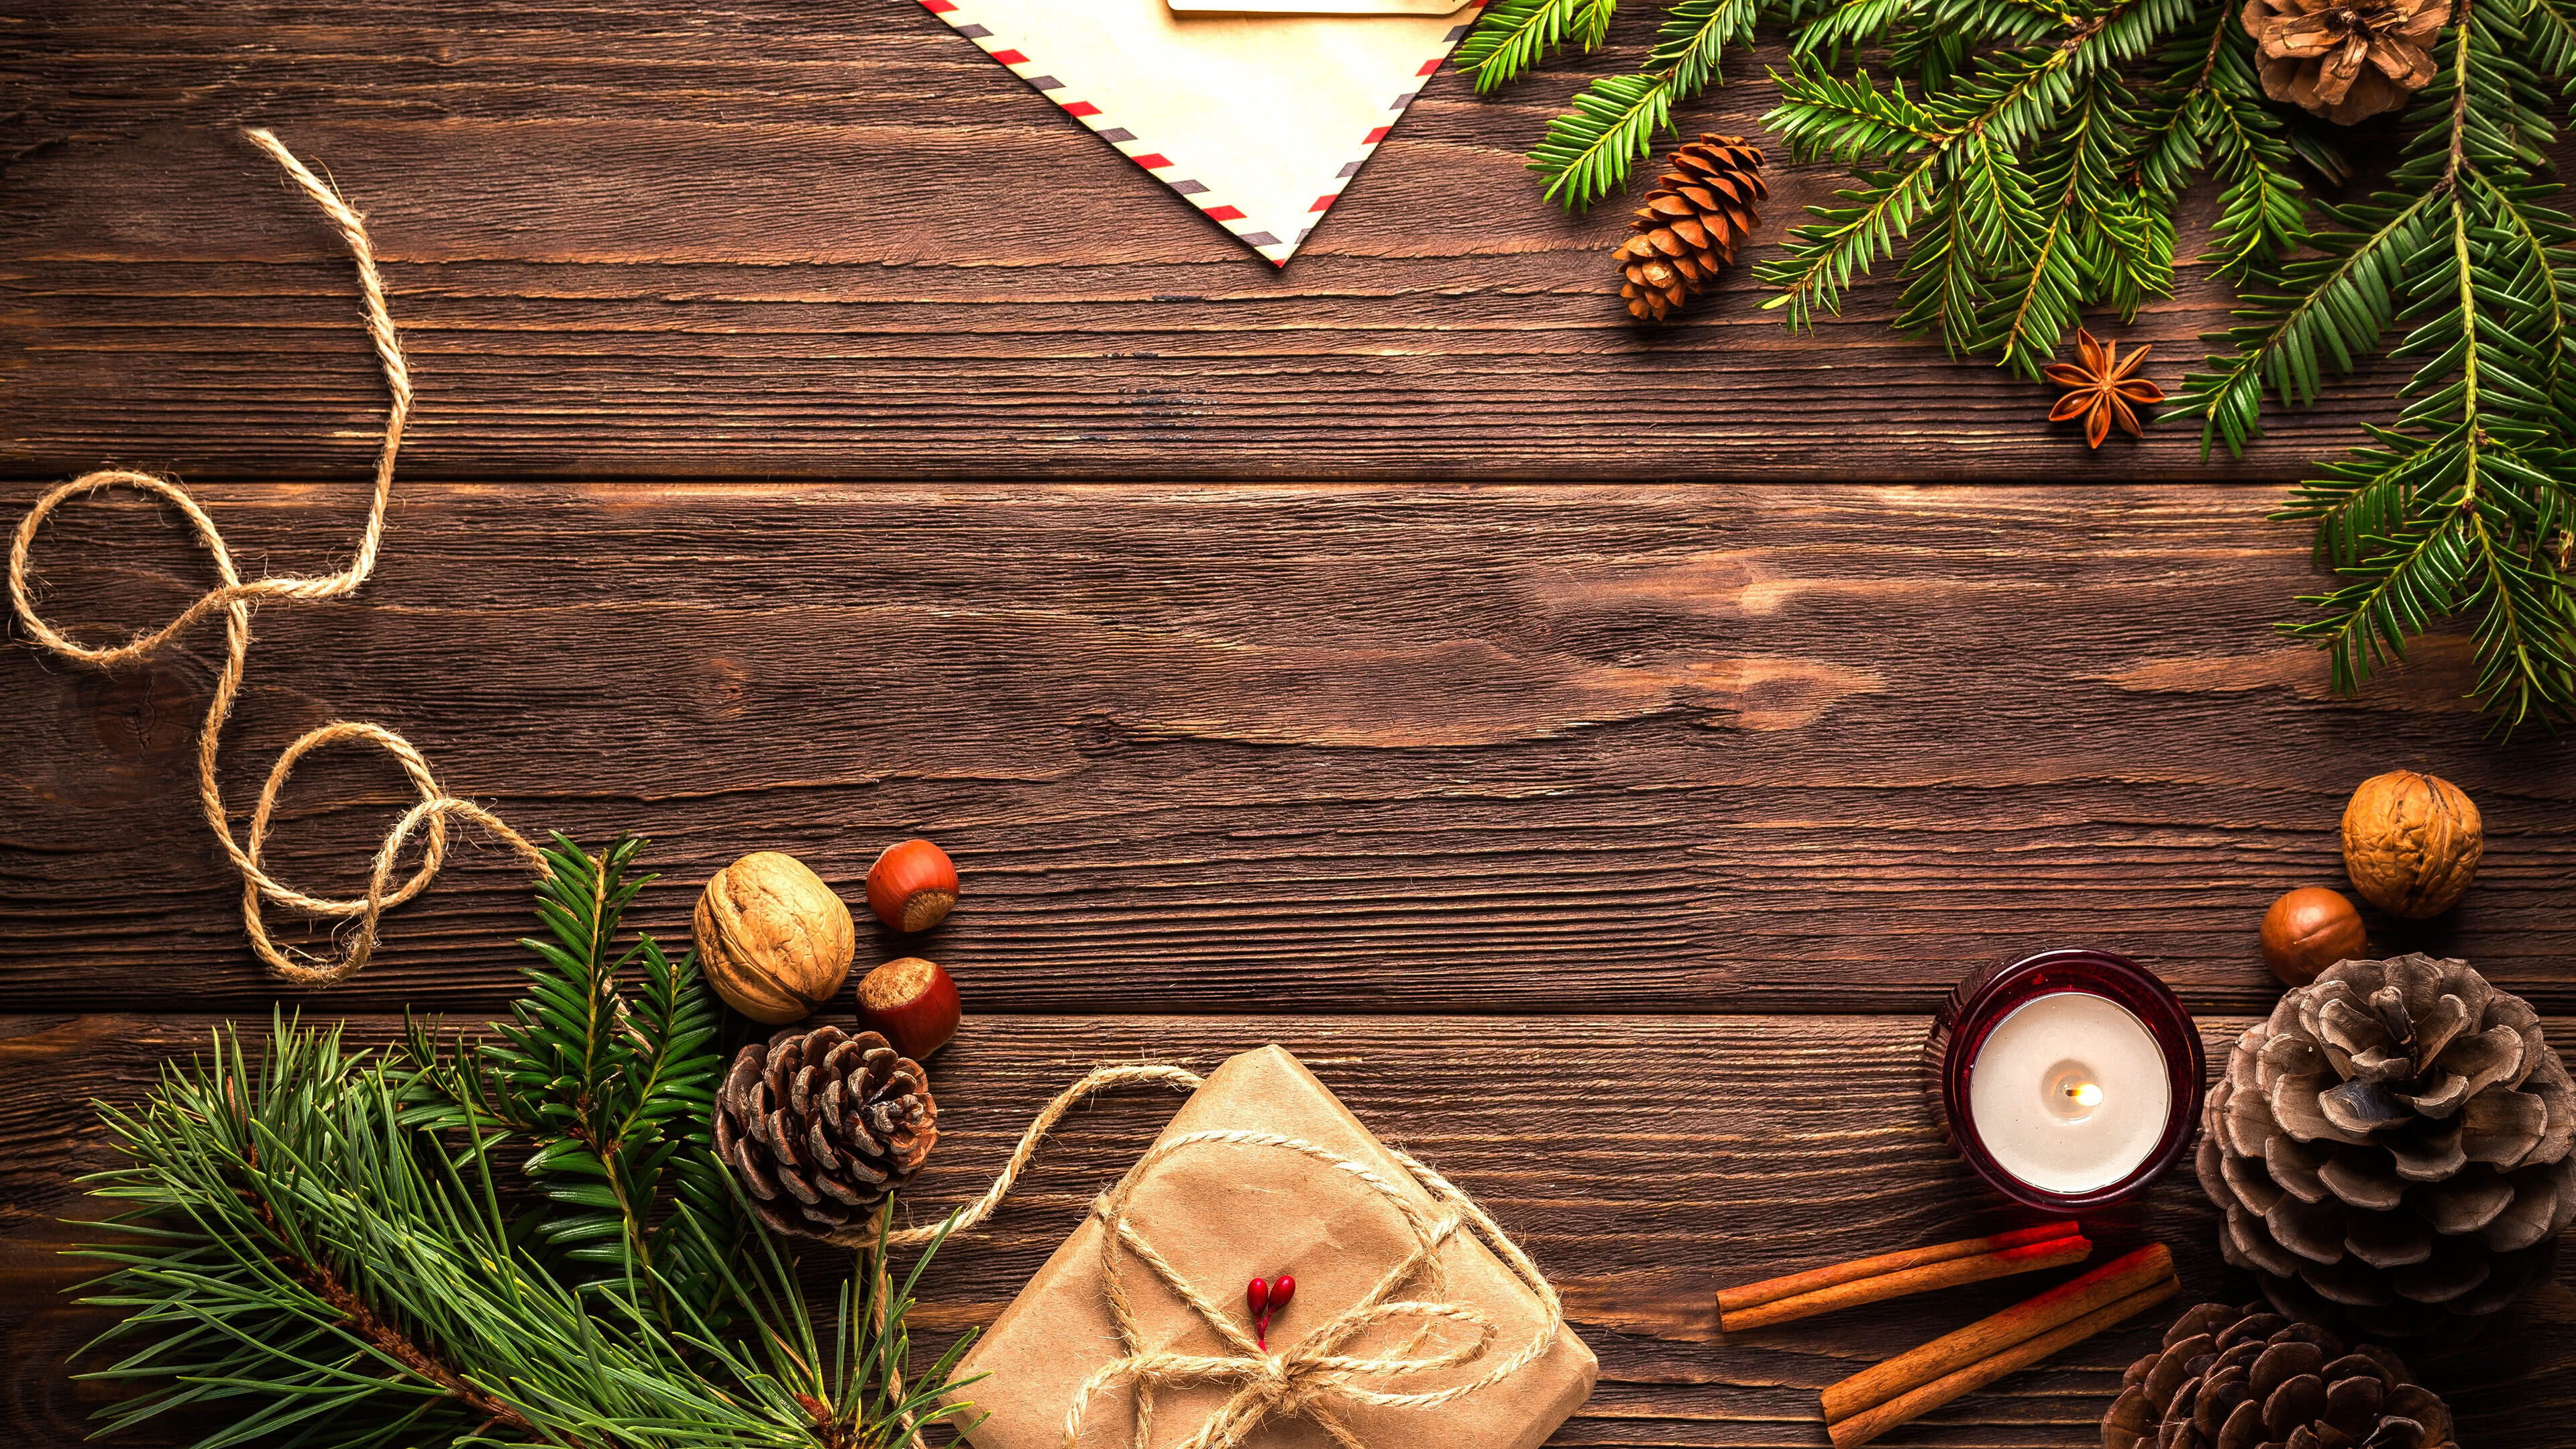 Christmas Ornament: Wood table, Decorations, Winter holydays. 3840x2160 4K Background.